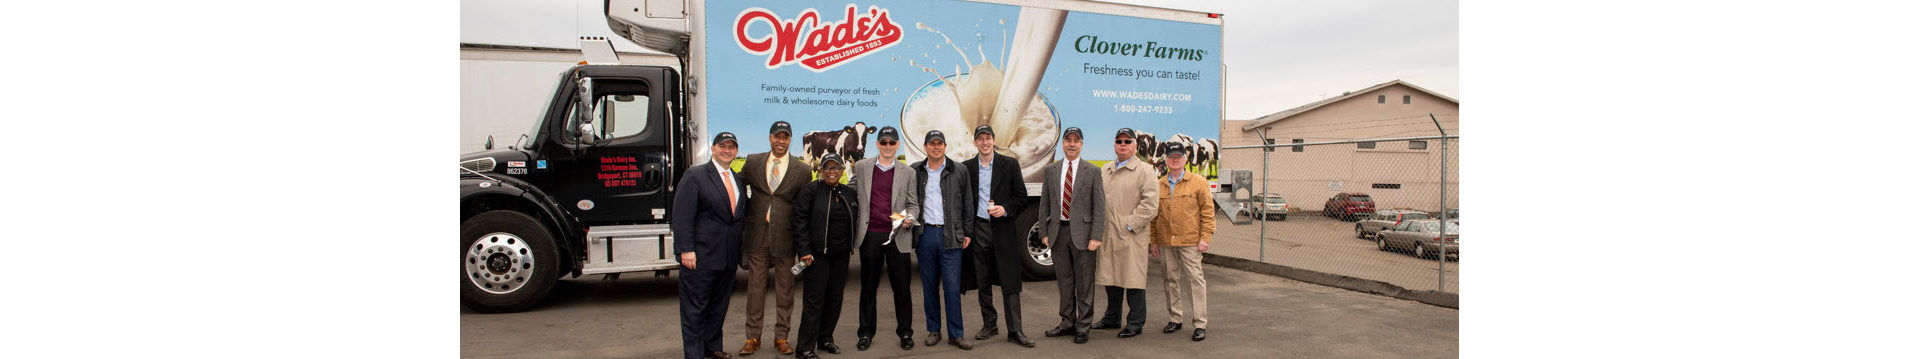 Wades Dairy Team_cropped